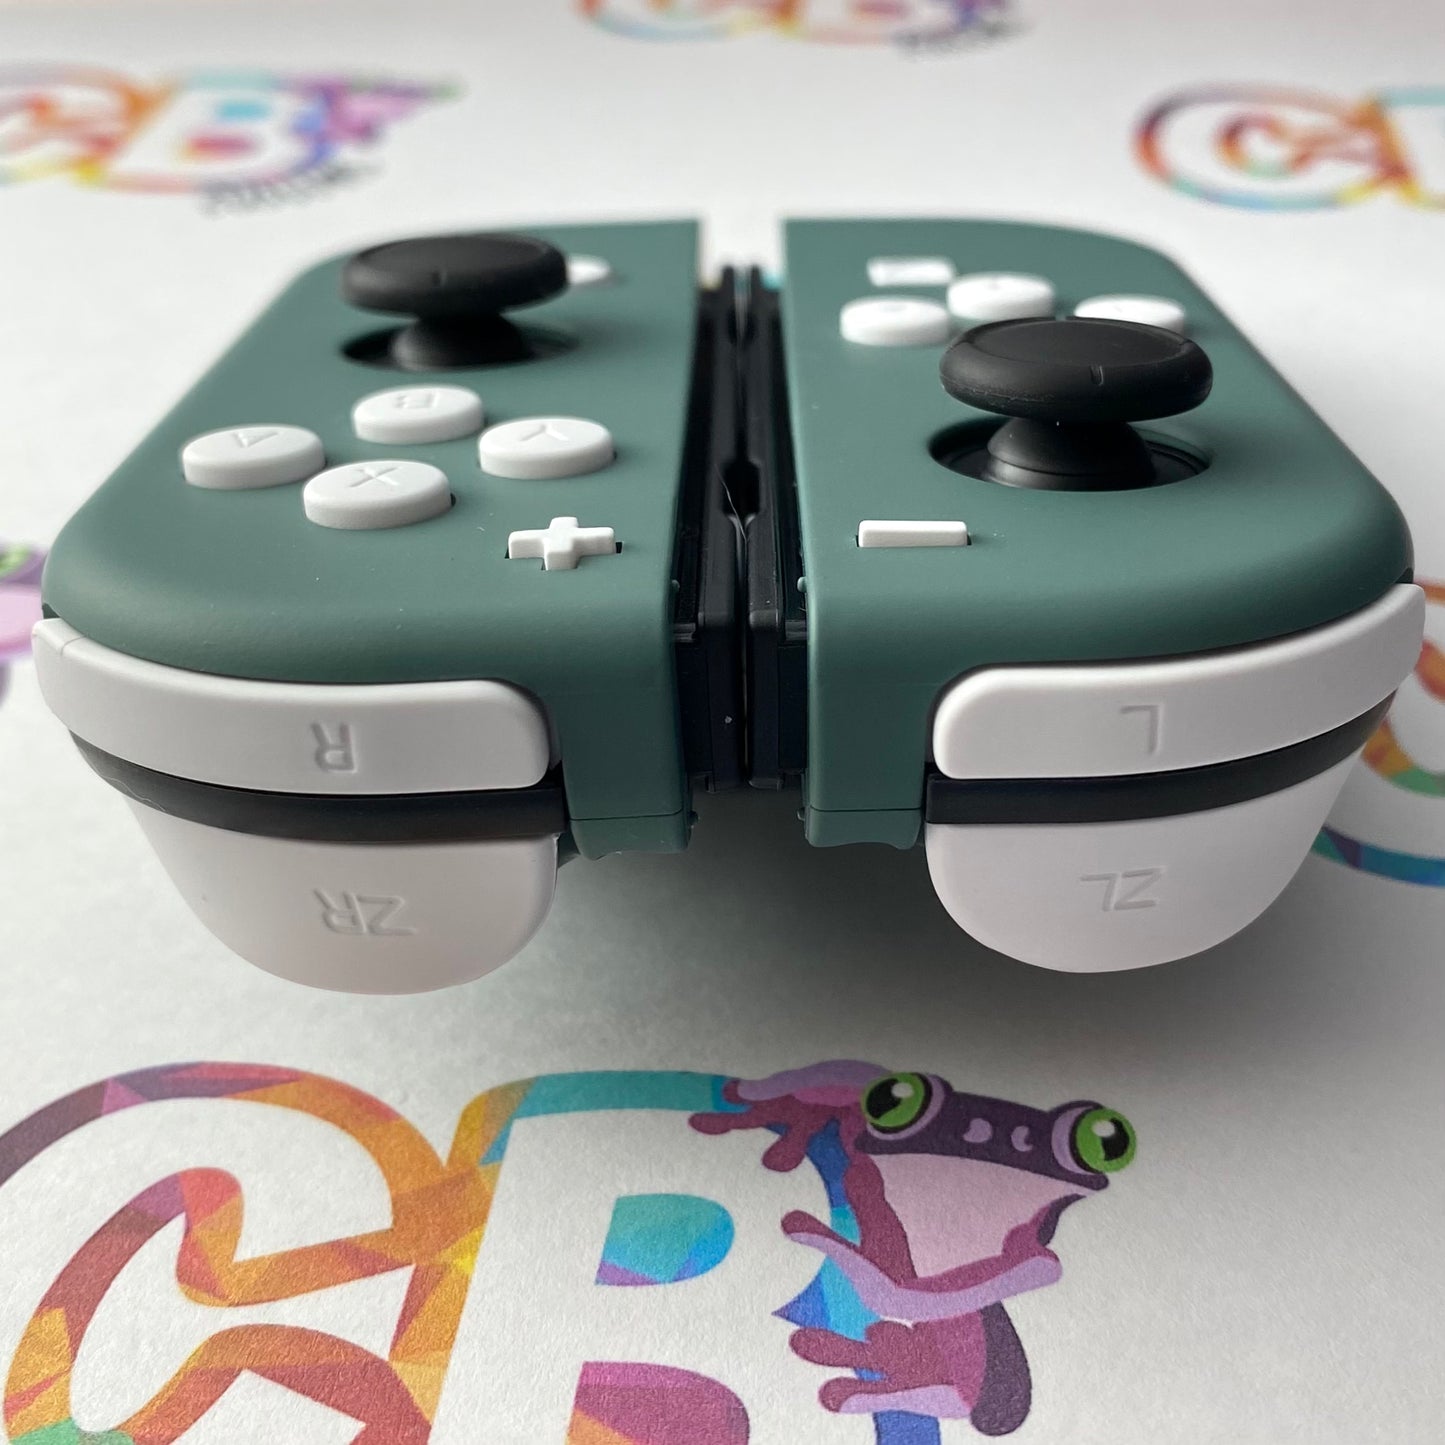 Pine Green & White Buttons Nintendo Switch Joycons  - Custom Nintendo Switch Joycon Controllers